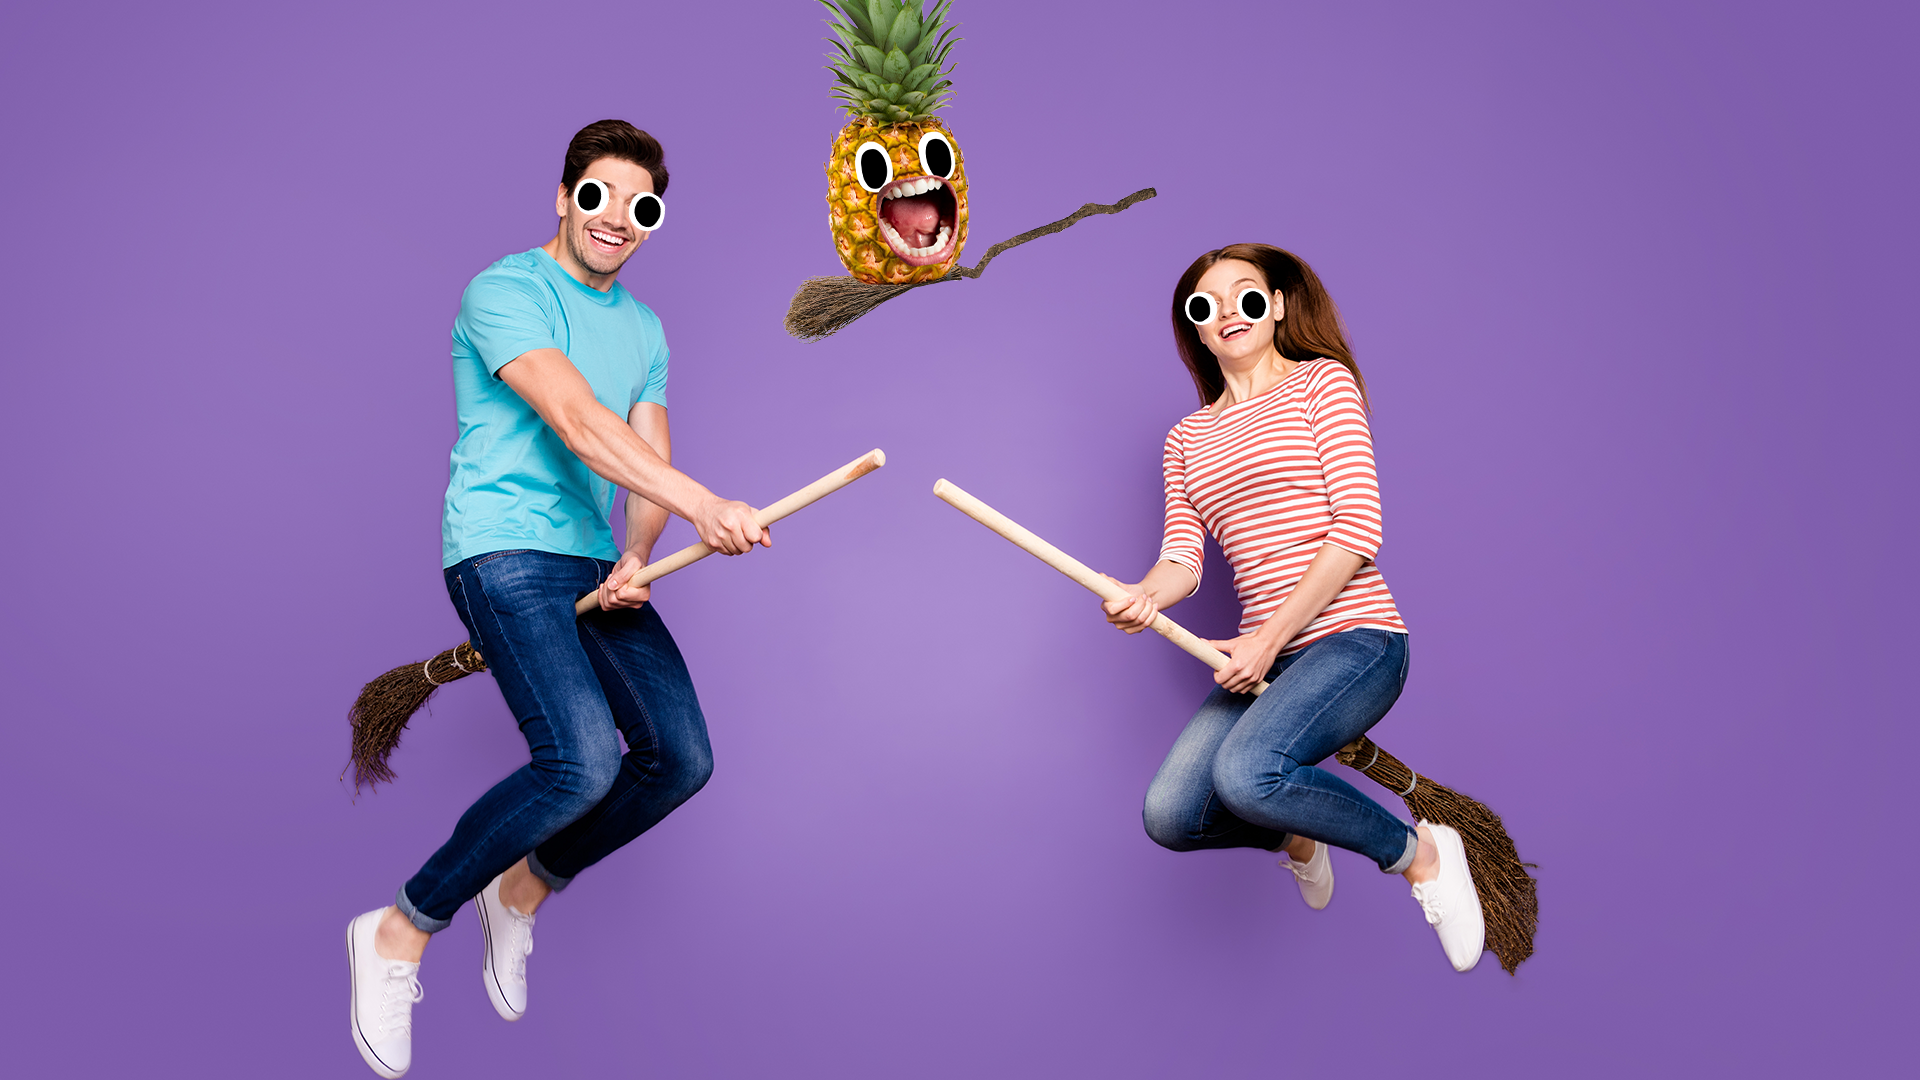 Man and woman on brooms on purple background, with Beano pineapple on broom